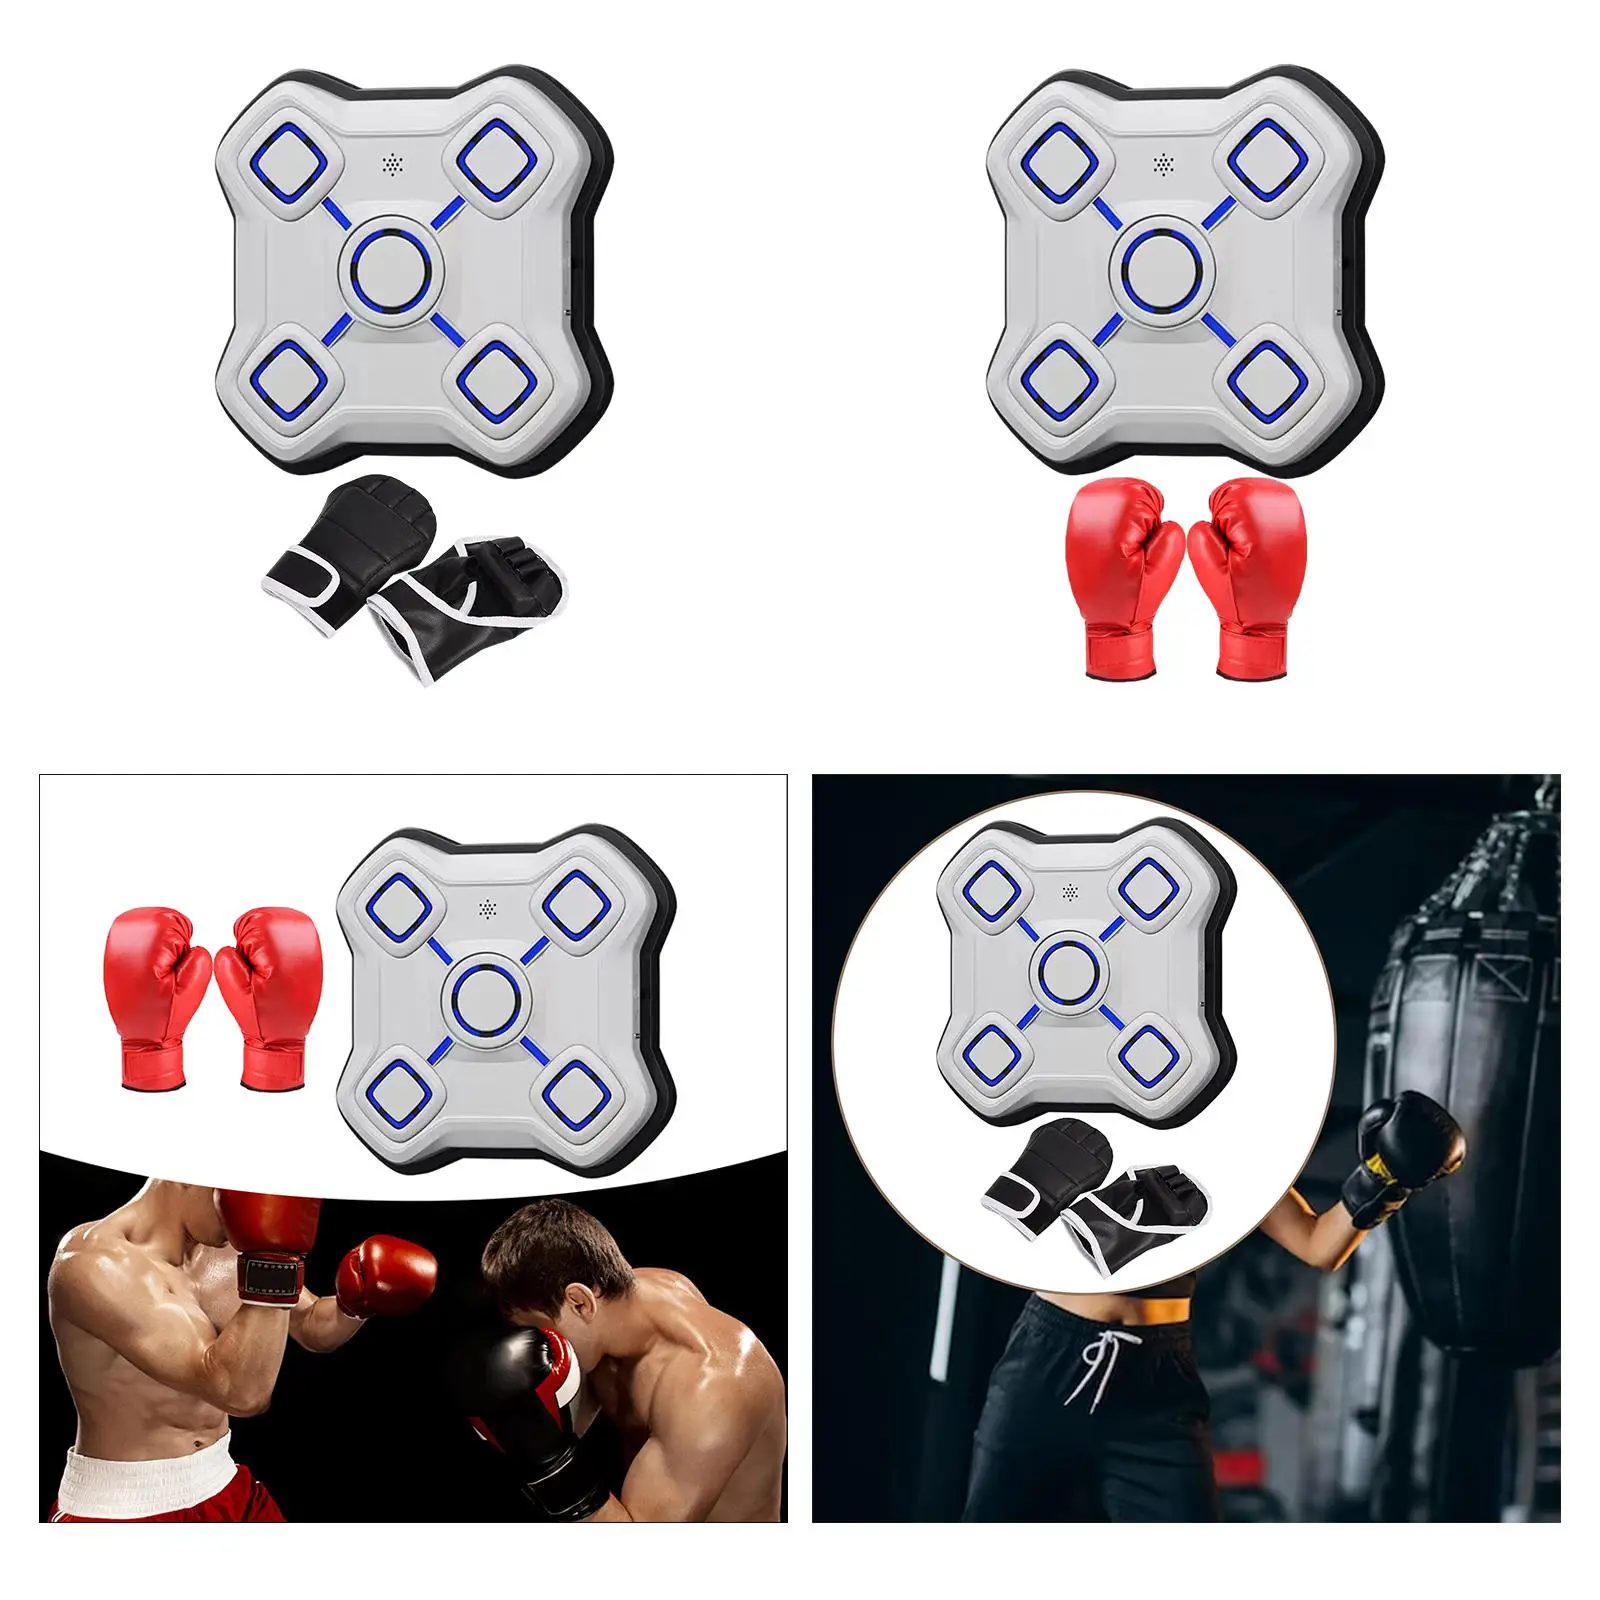 Boxing Machine Smart Boxing Trainer Electronic Music Boxing Wall Target for Reaction Martial Arts Gym Exercise Strength Training